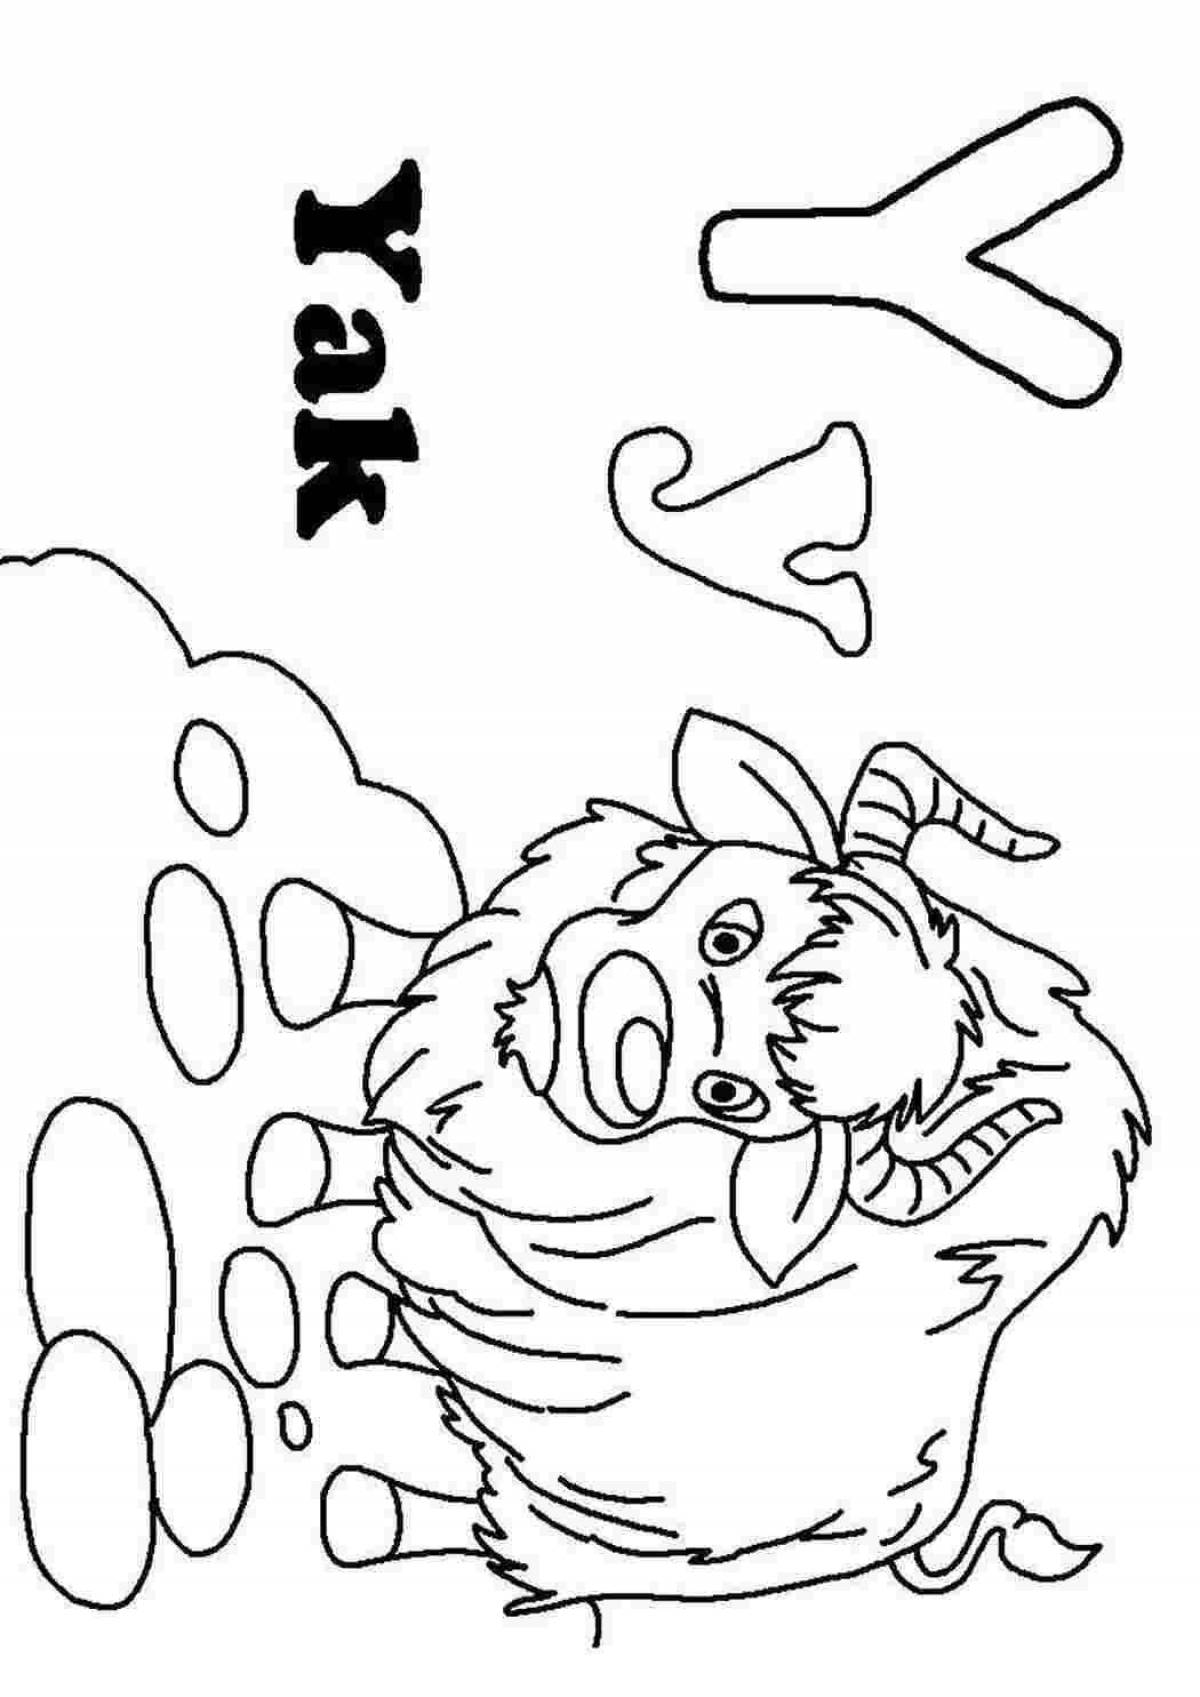 Terrible coloring page alphabet